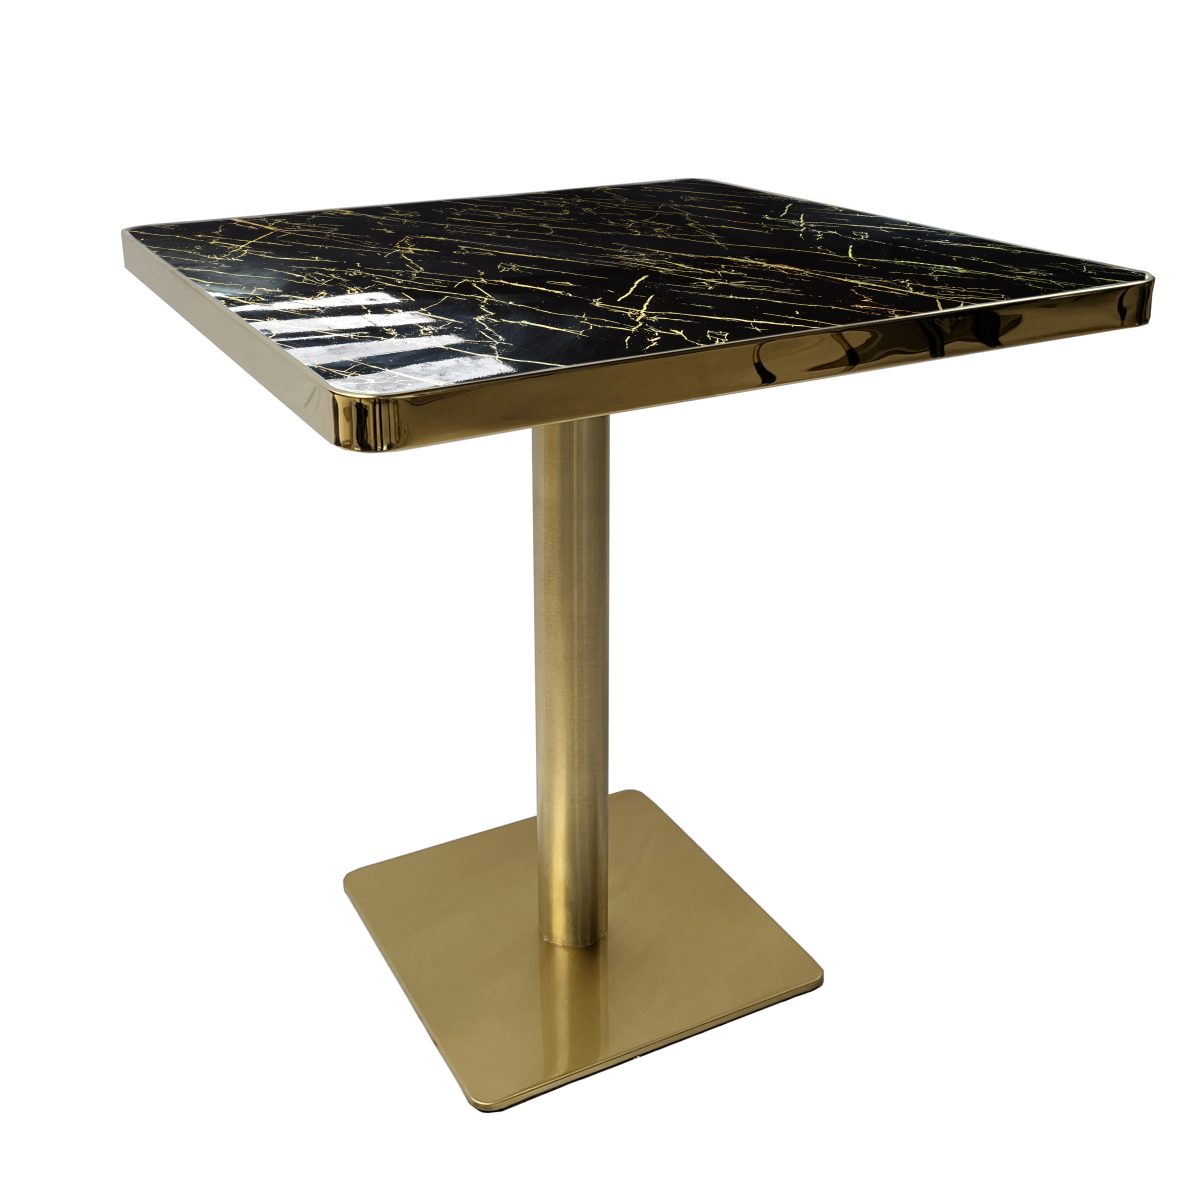 Black & Gold Marble Table